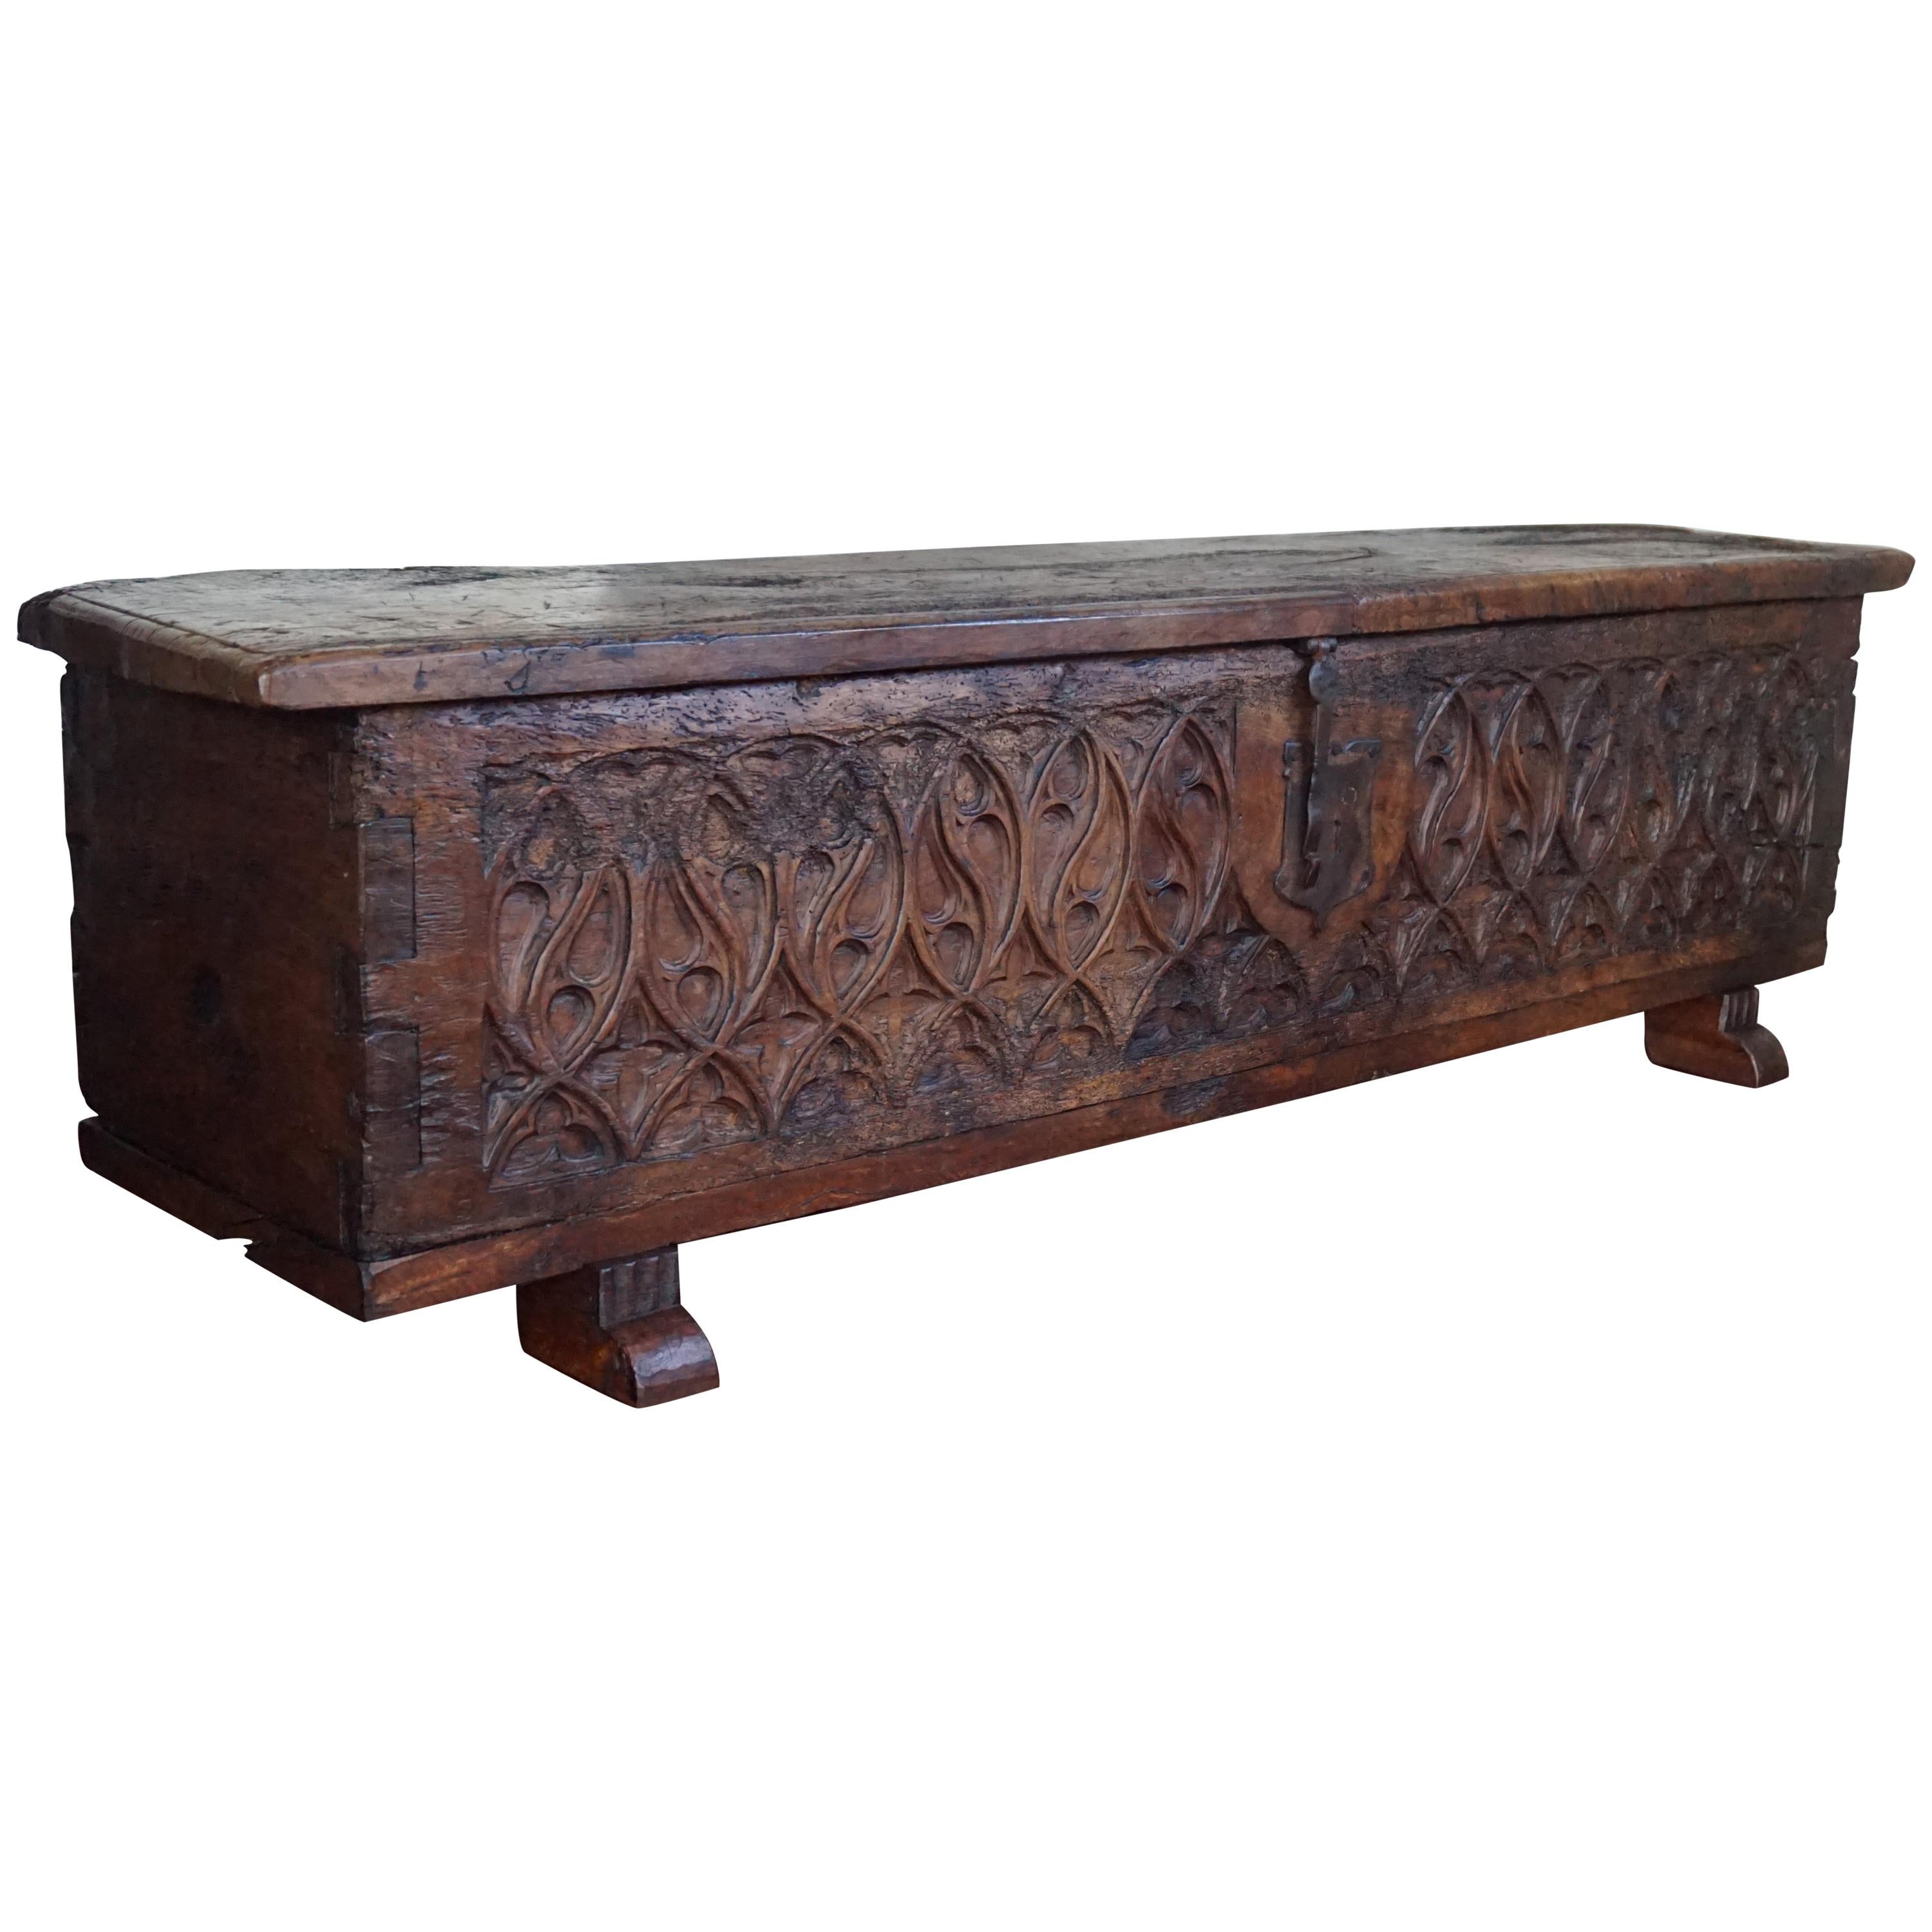 Unique 16th Century, Hand Carved French Gothic Revival Nutwood Blanket Chest